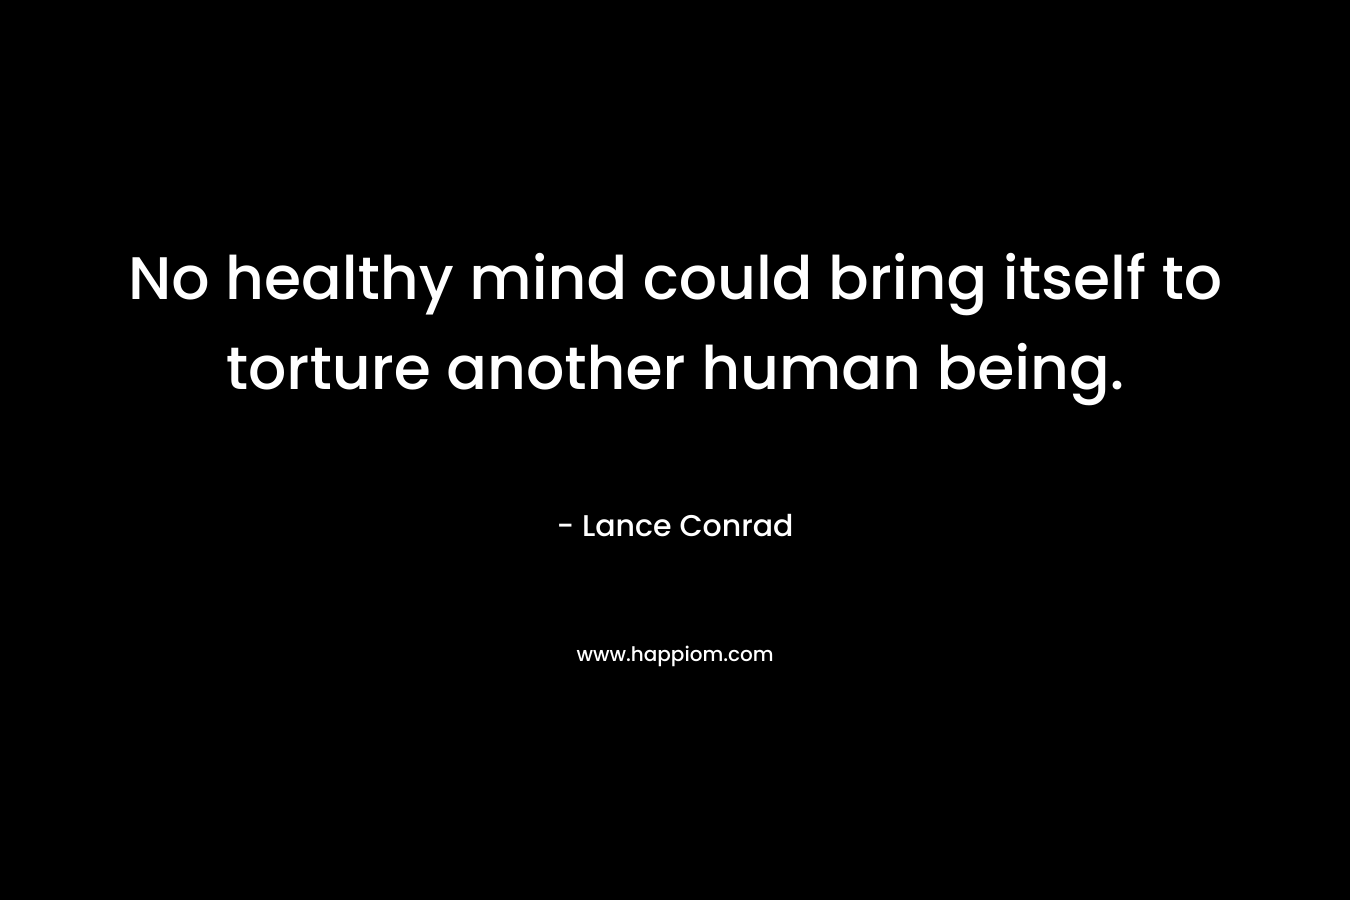 No healthy mind could bring itself to torture another human being. – Lance Conrad